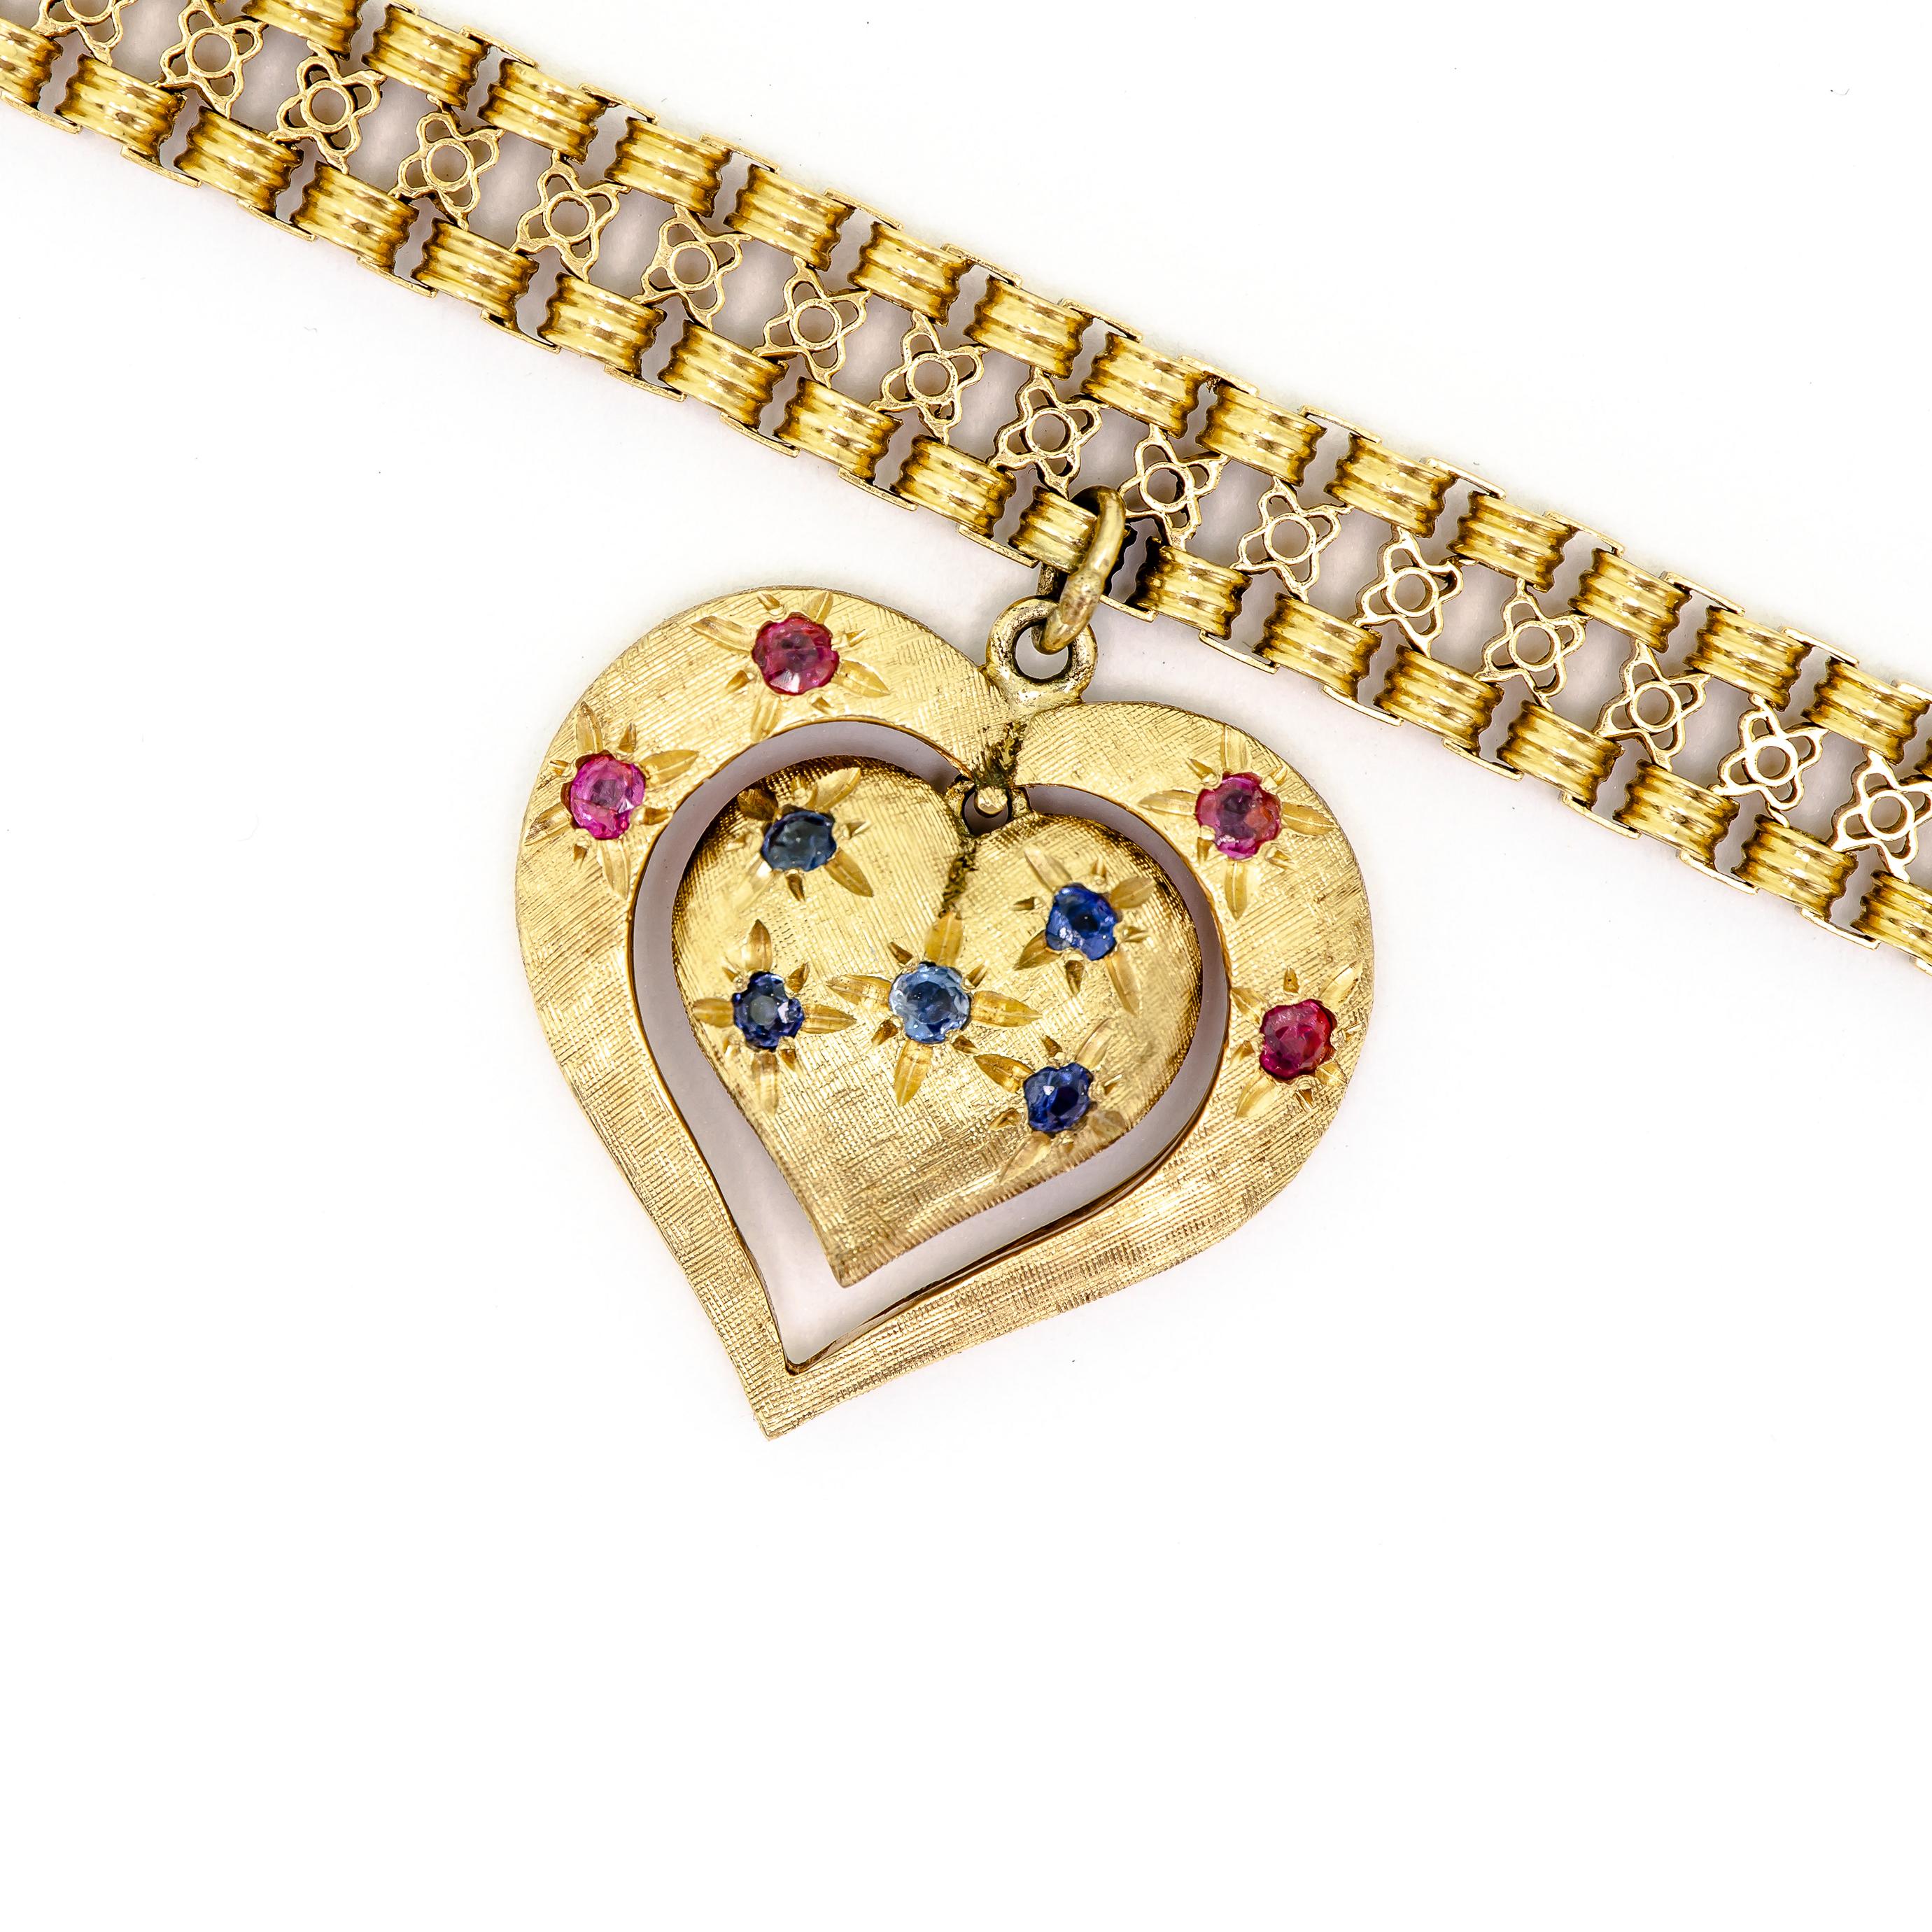 Vintage Mid Century 18KT yellow gold flexible bracelet fancy link with a brushed finish 14kt yellow gold articulated double sided heart charm with one side set with rubies and the other side set with blue sapphires. Gold safety